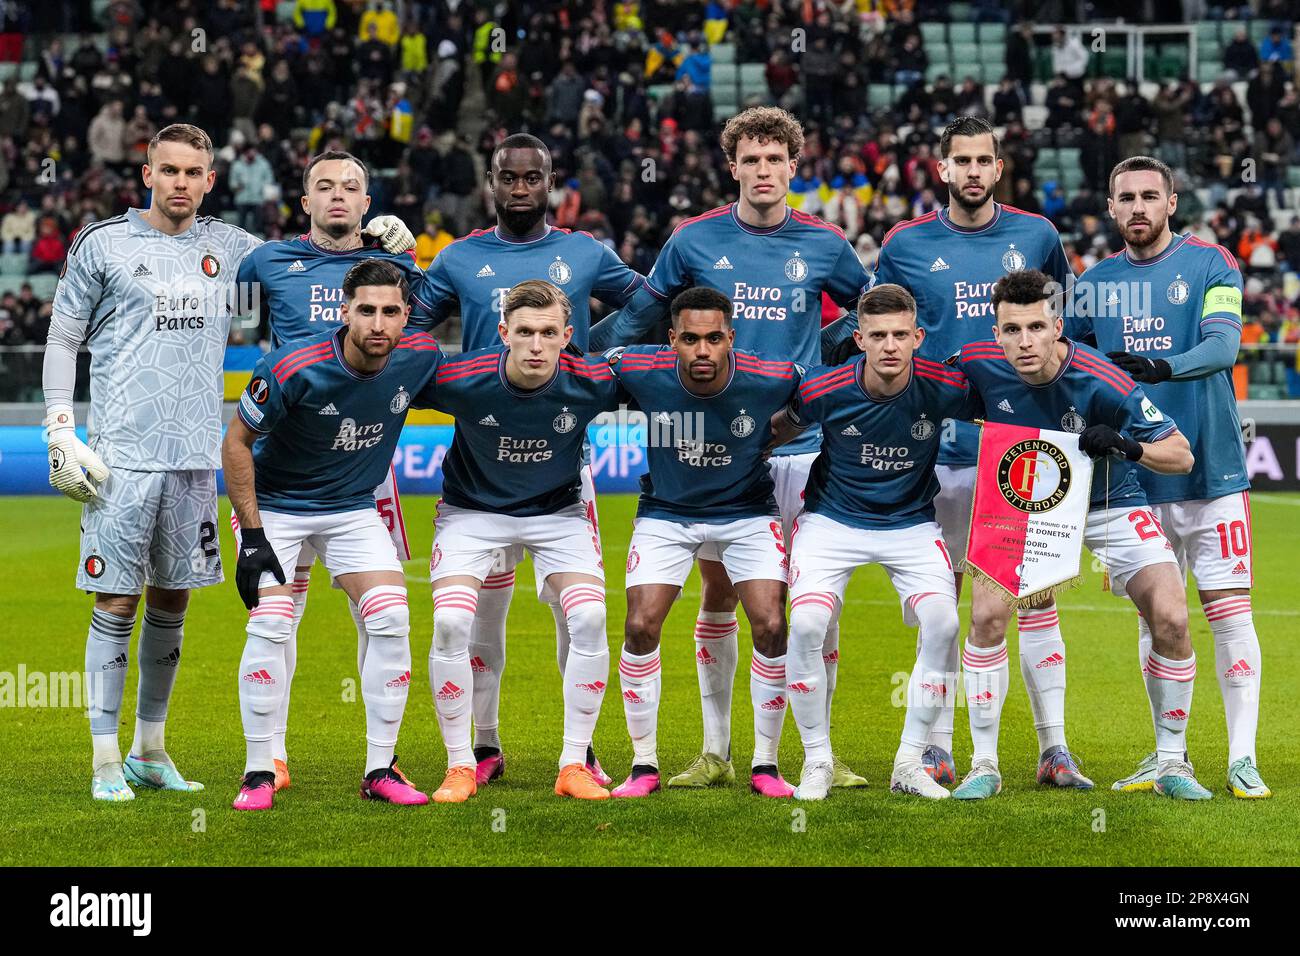 Warsaw - Players of Feyenoord during the match between Shakhtar Donetsk v Feyenoord at Stadion Wojska Polskiego on 9 March 2023 in Warsaw, Poland. (Box to Box Pictures/Tom Bode) Stock Photo